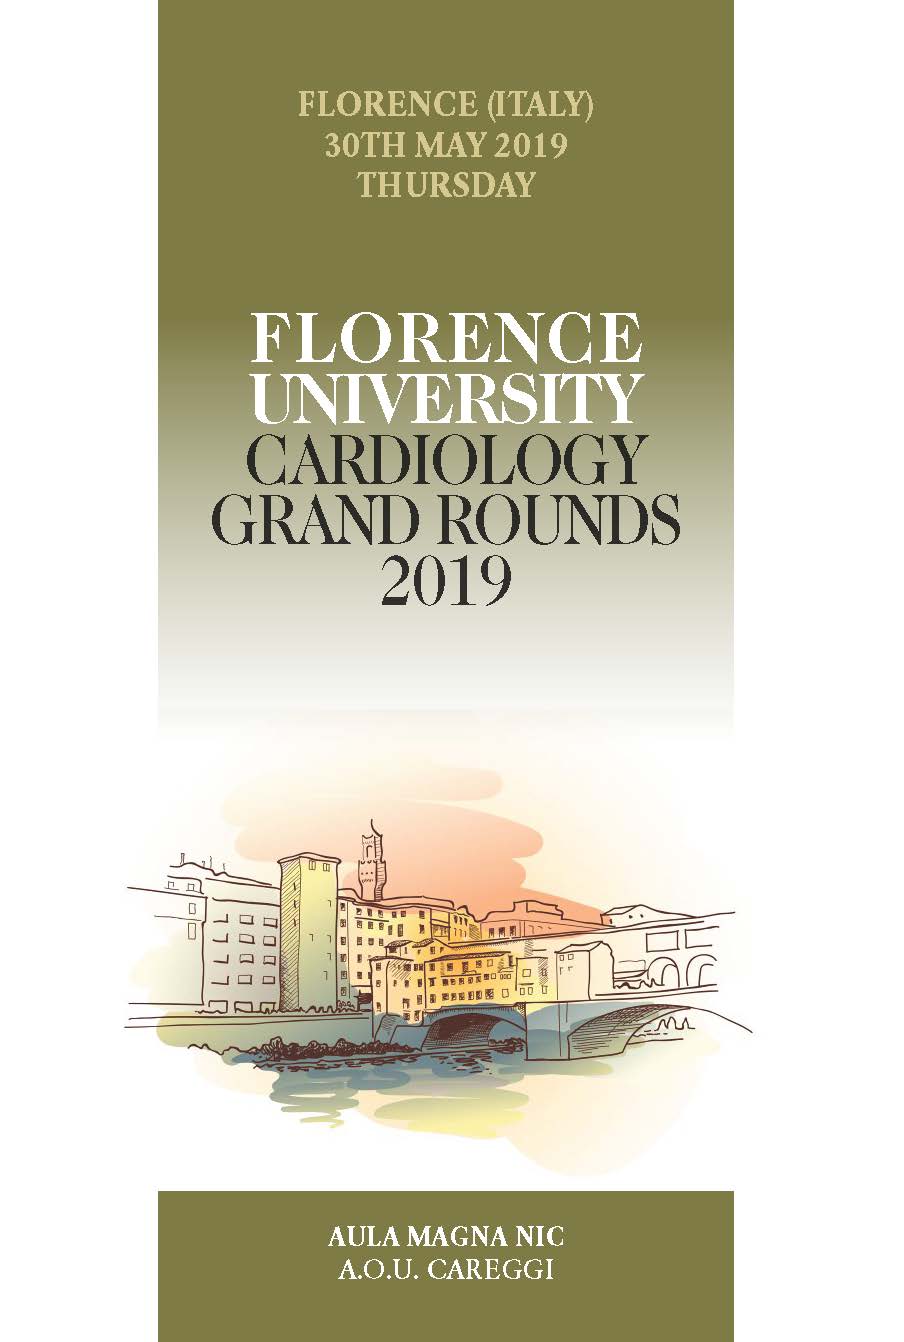 Florence University Cardiology Grand Rounds 2019